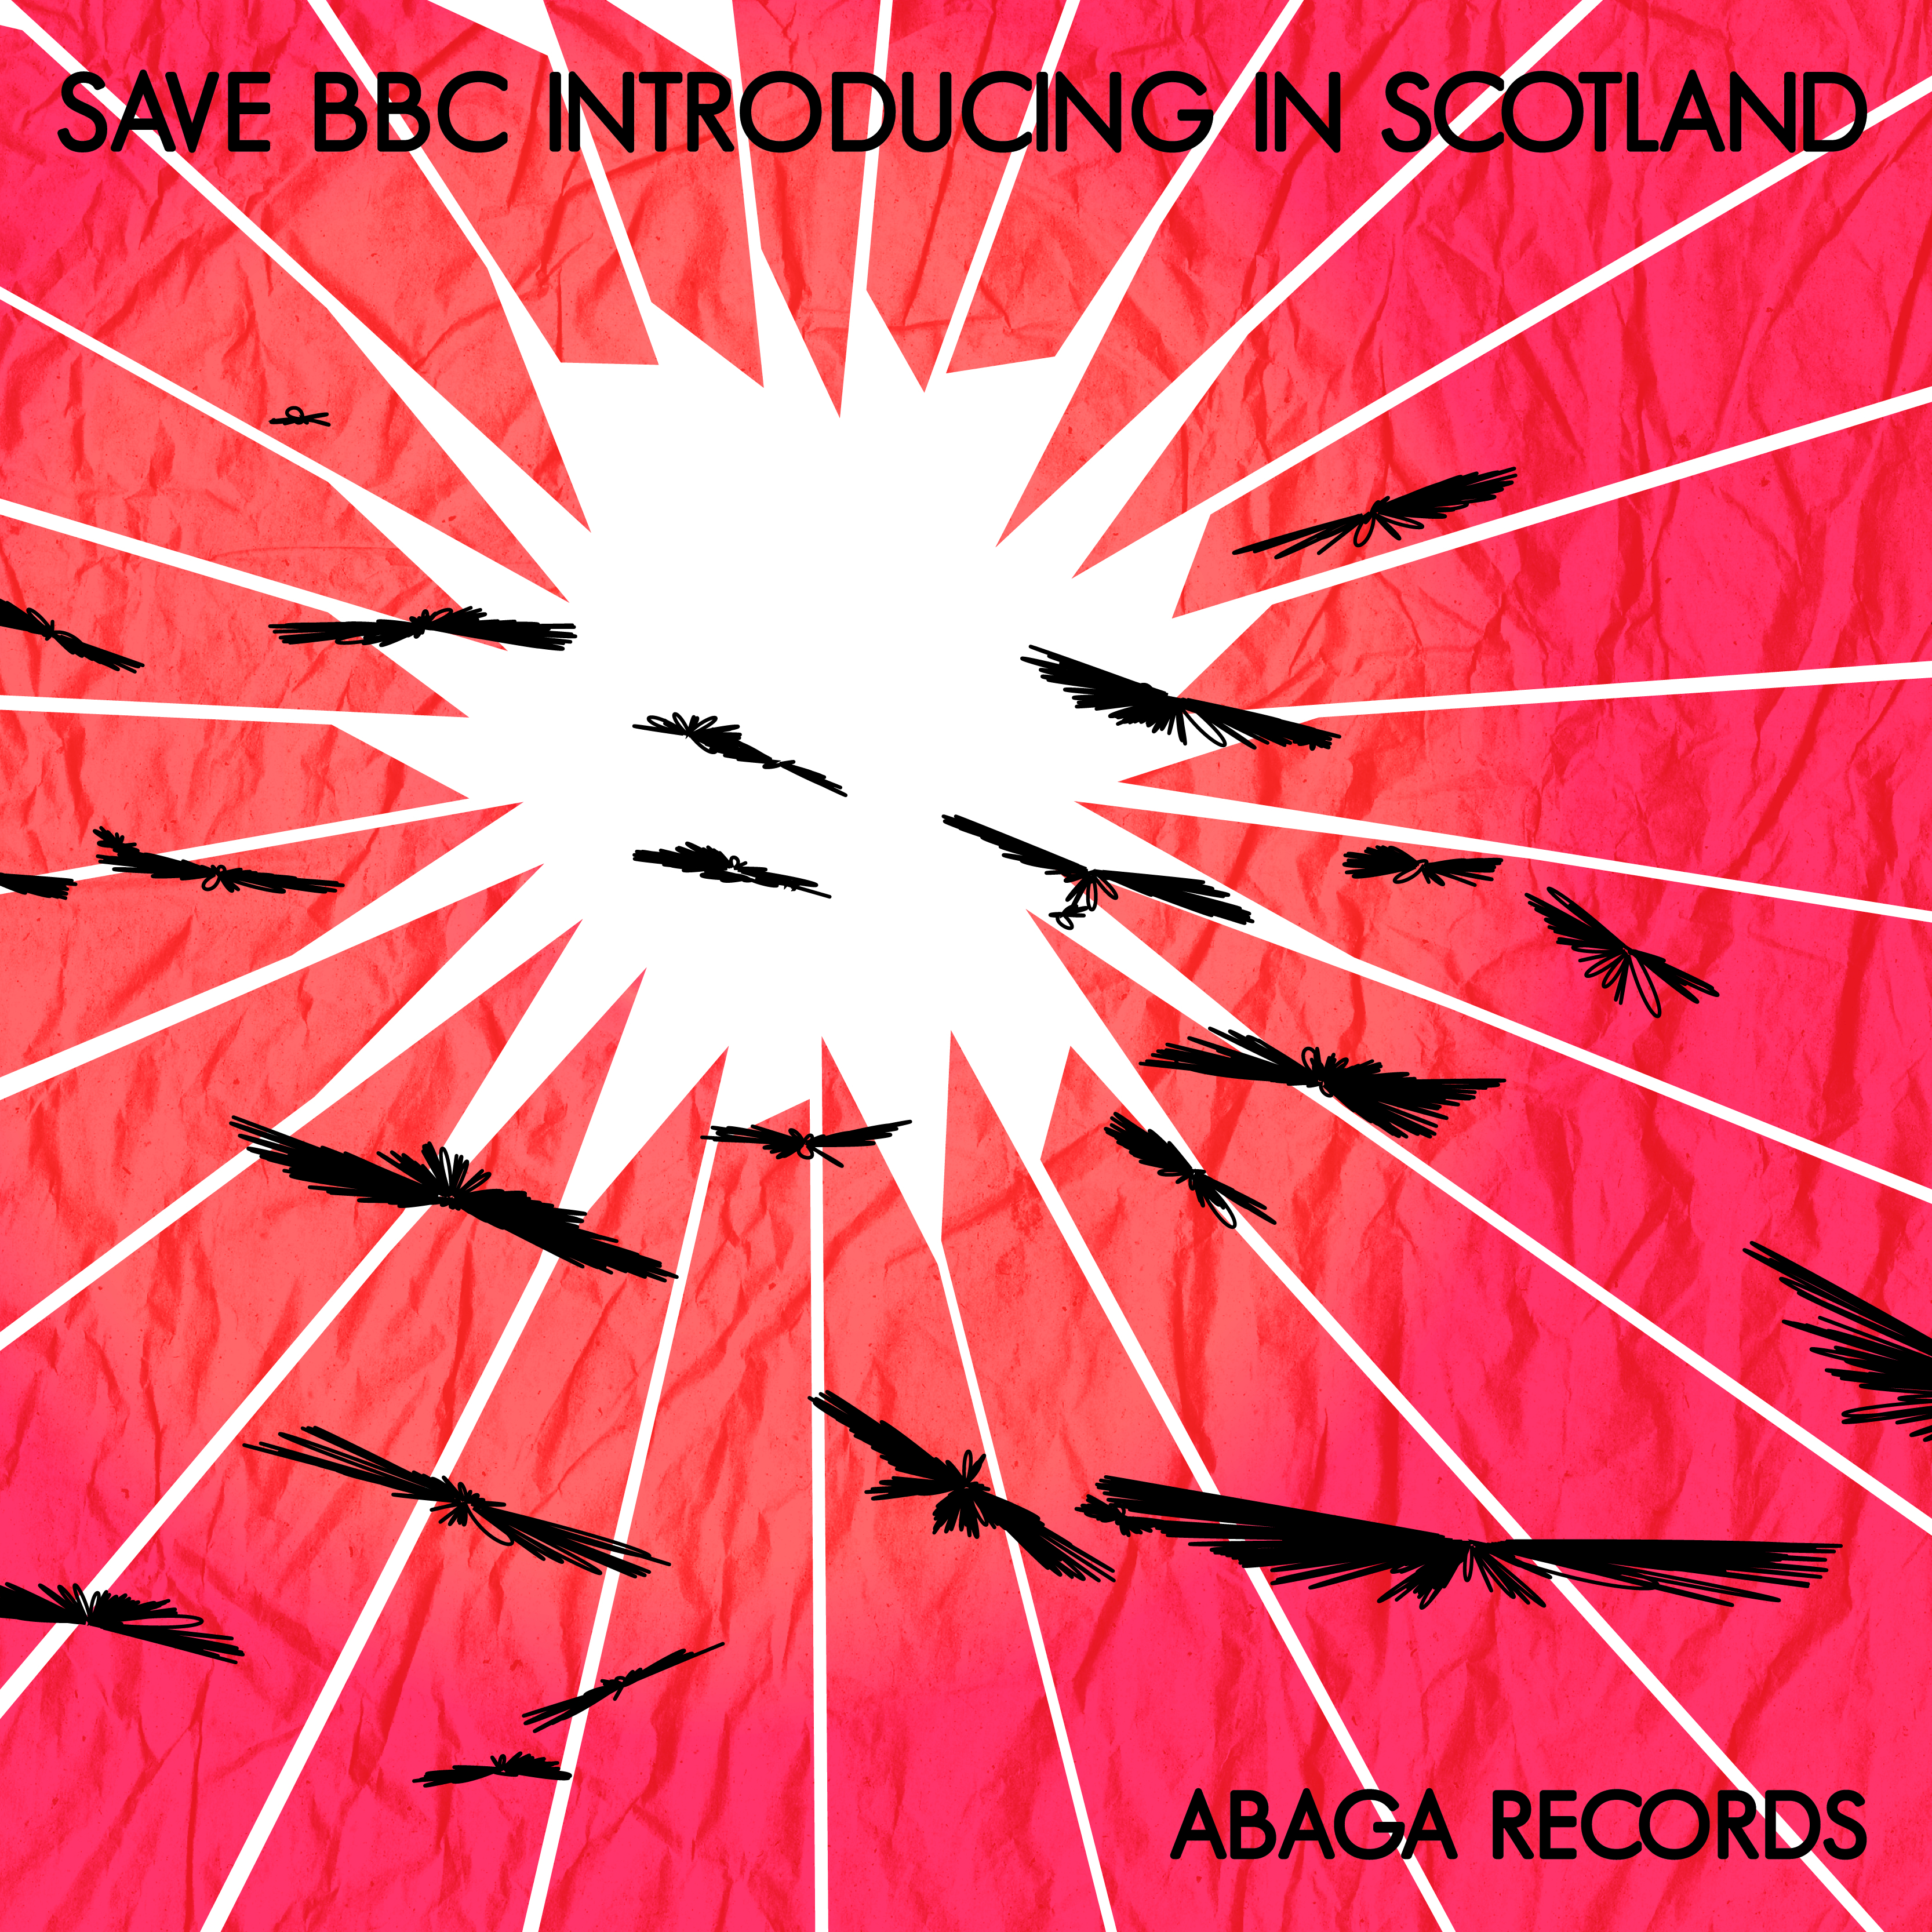 Save BBC Introducing in Scotland